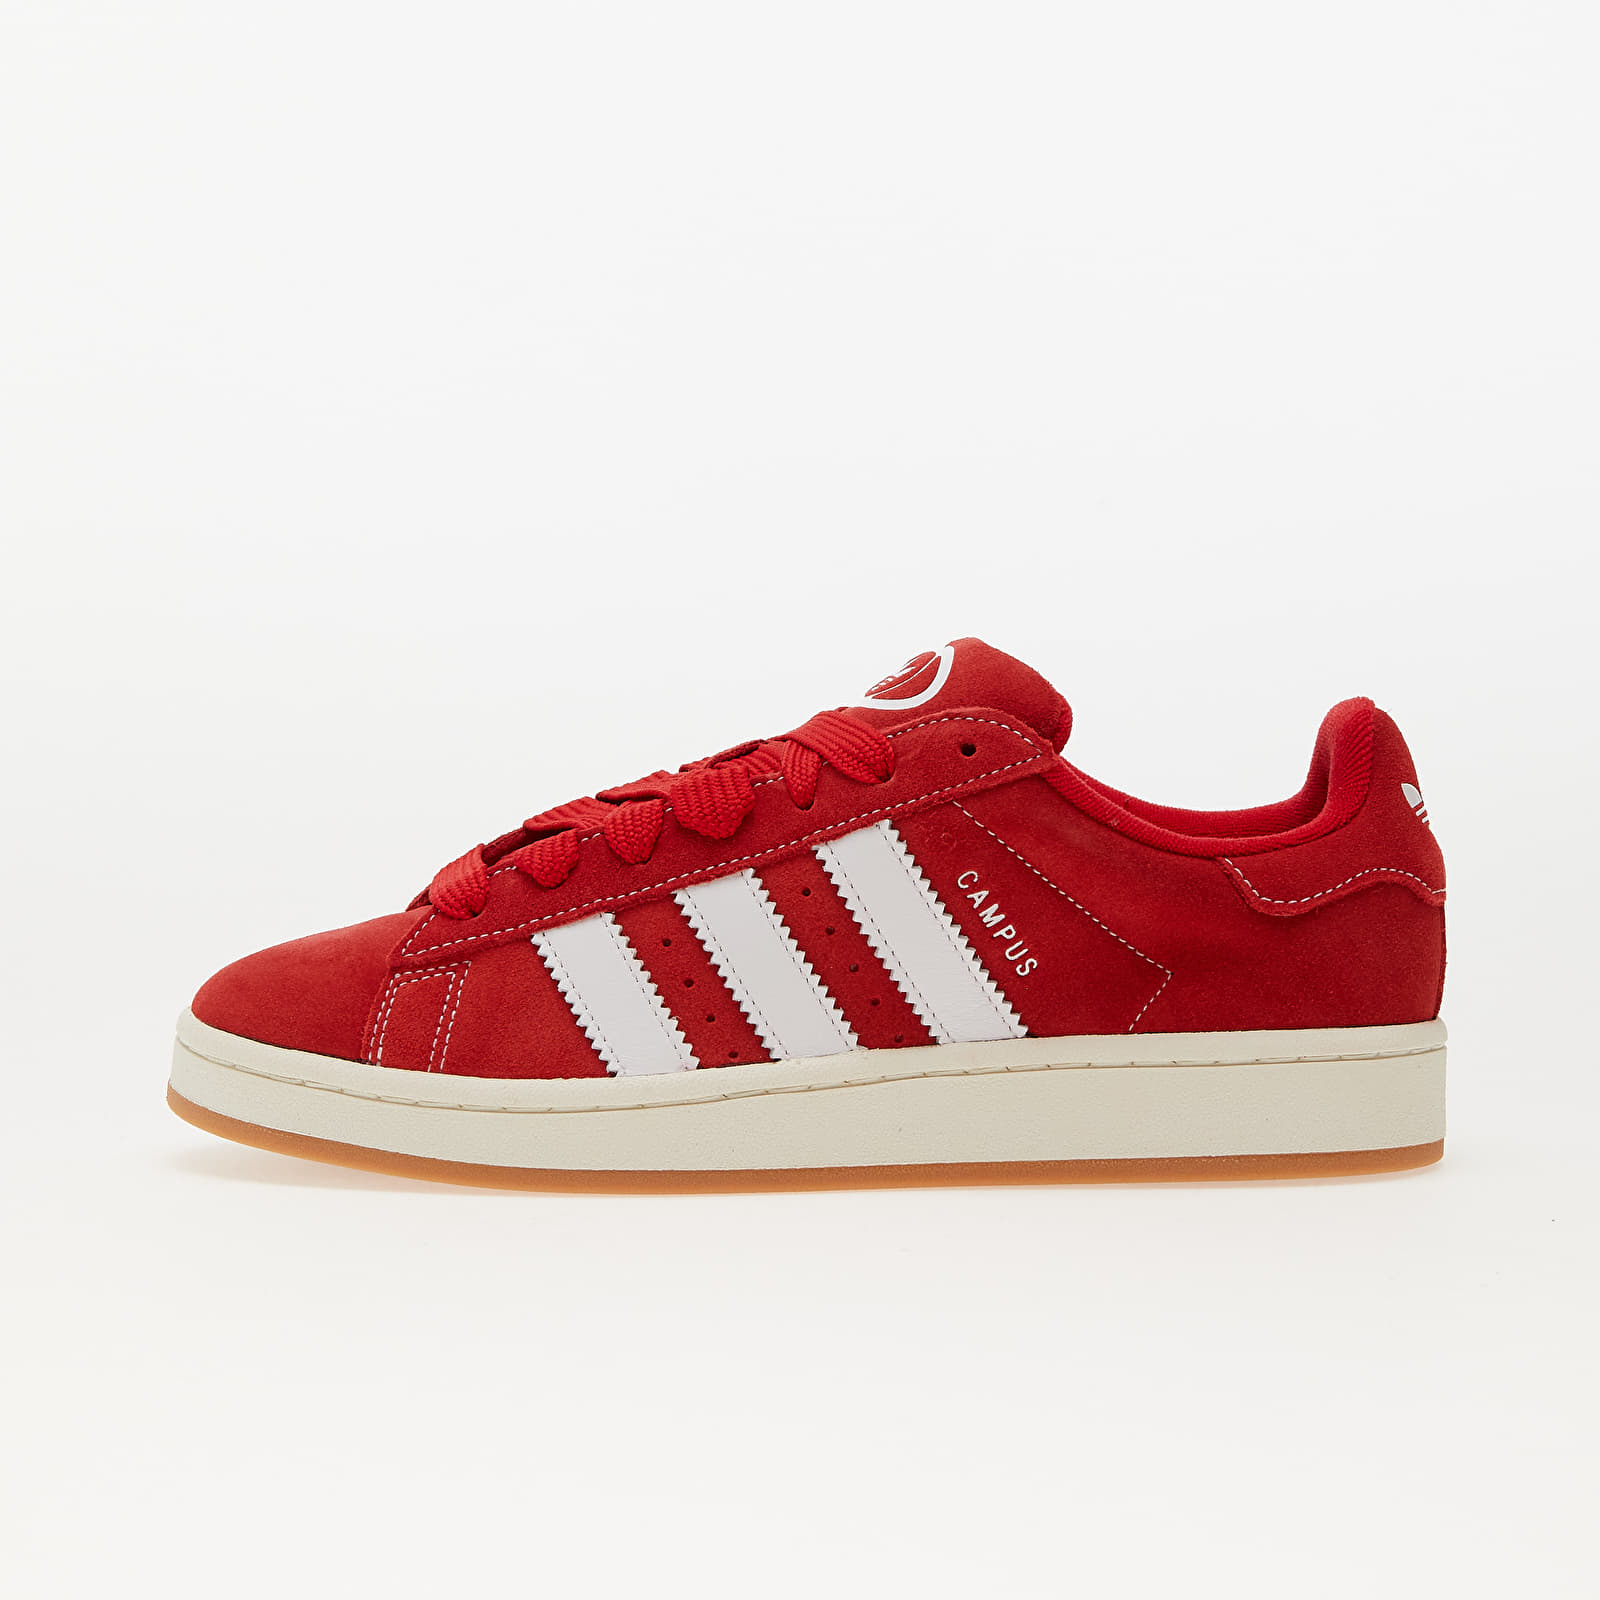 Baskets et chaussures pour hommes adidas Campus 00s Better Scarlet/ Ftw White/ Off White